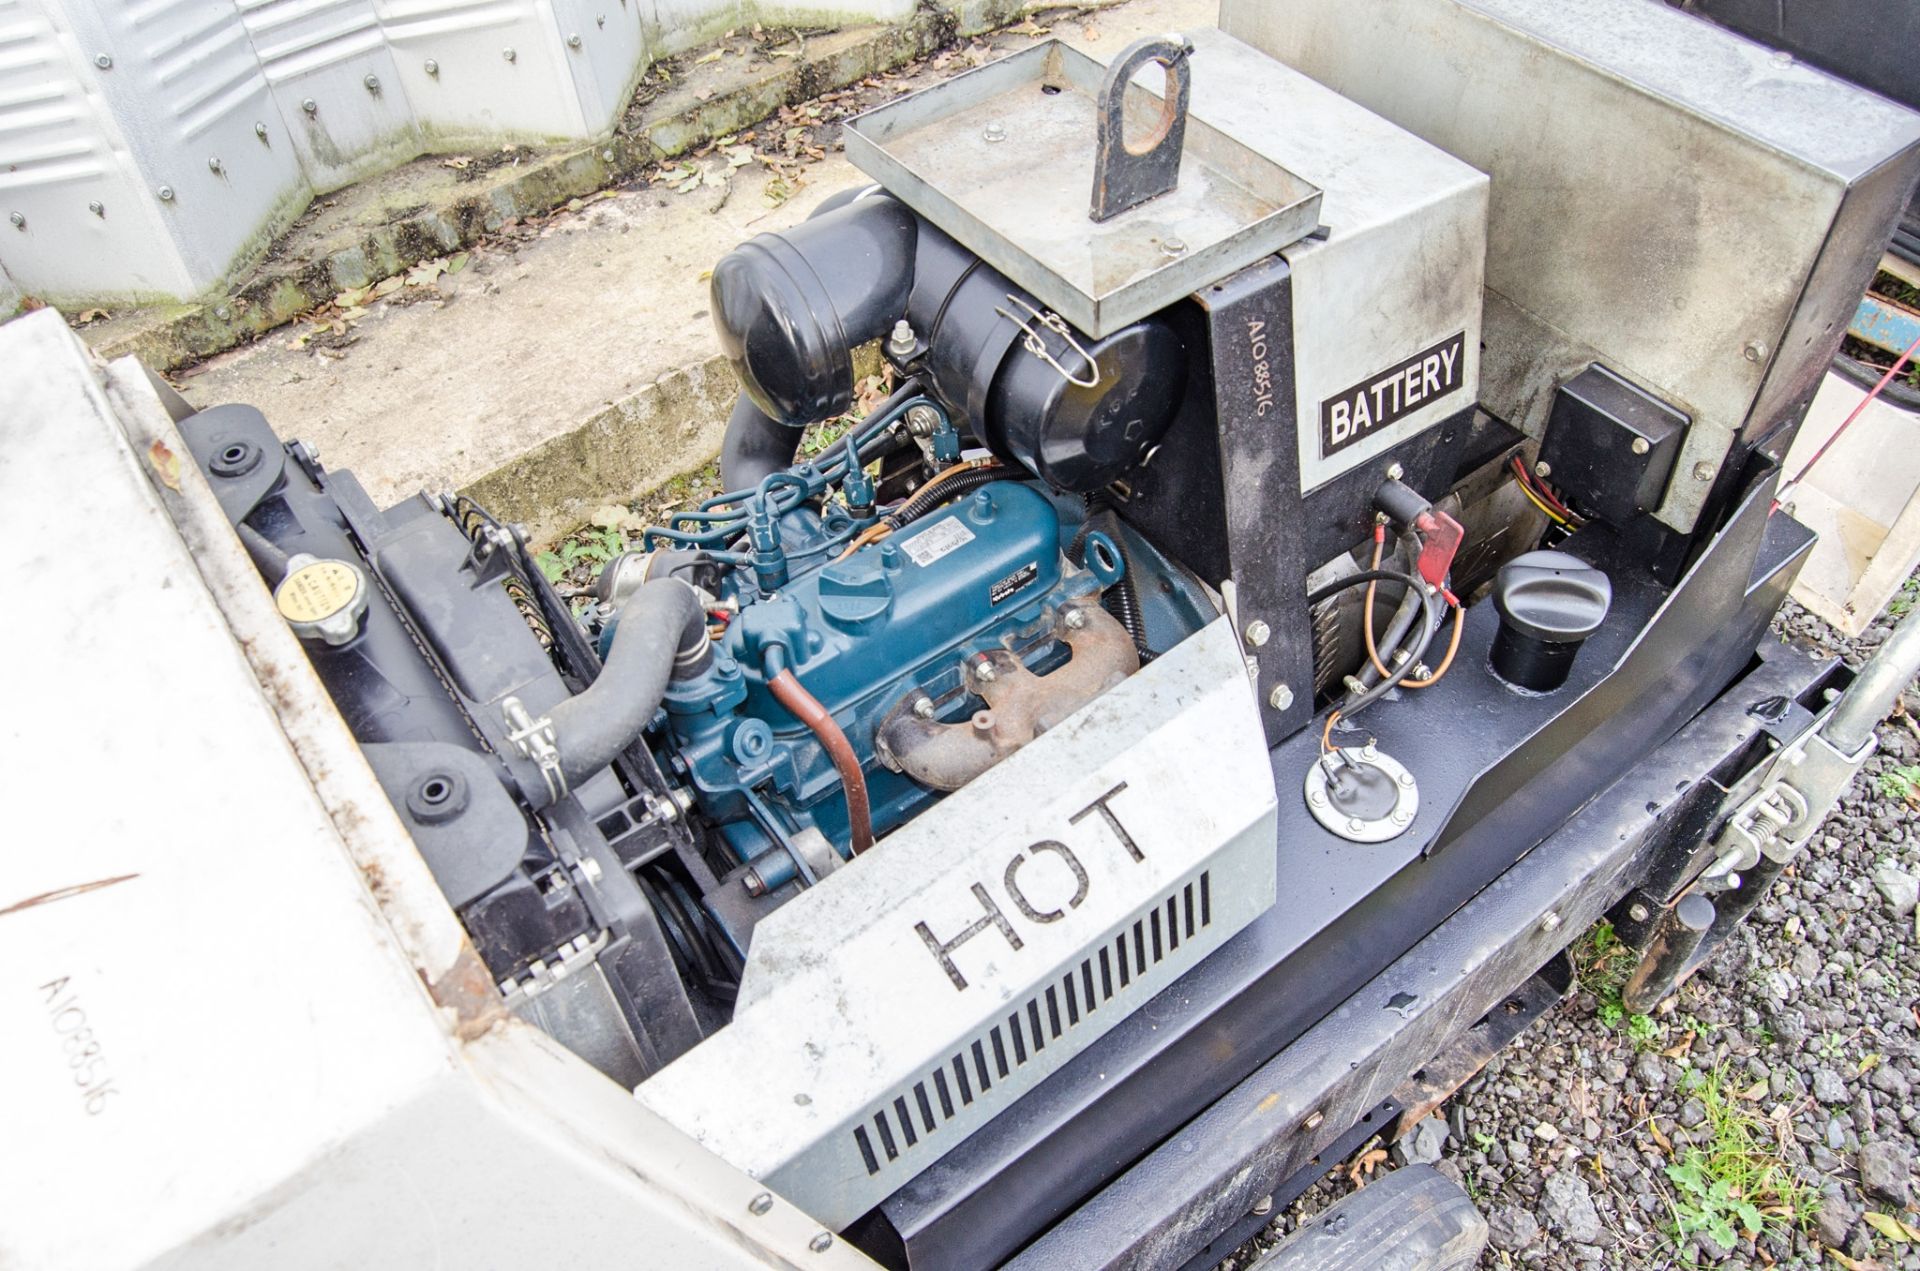 MHM MG1000-SSK-V diesel driven 10 kva generator S/N: 229190028 Recorded hours: 3484 A1088516 - Image 5 of 5